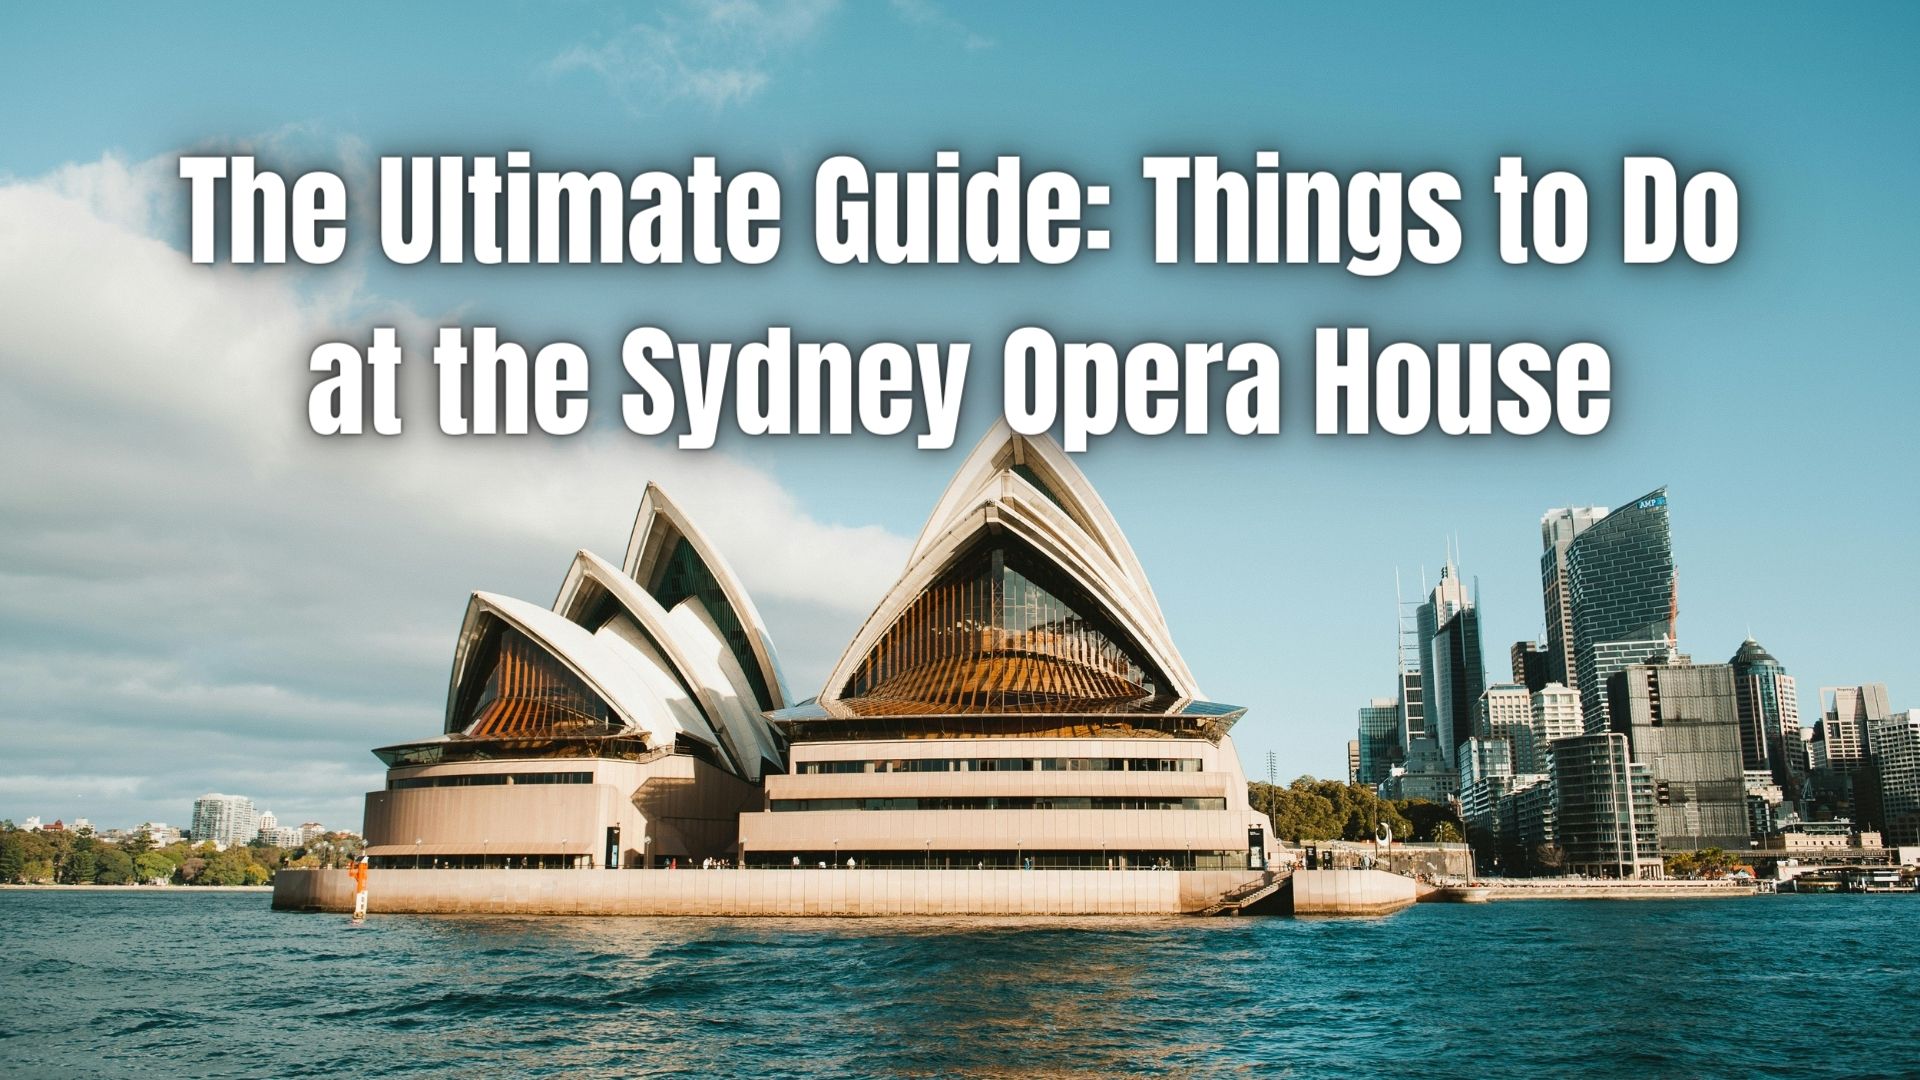 We are unveiling the Sydney Opera House! This guide offers tours, show info and fascinating secrets hidden beneath the sails.